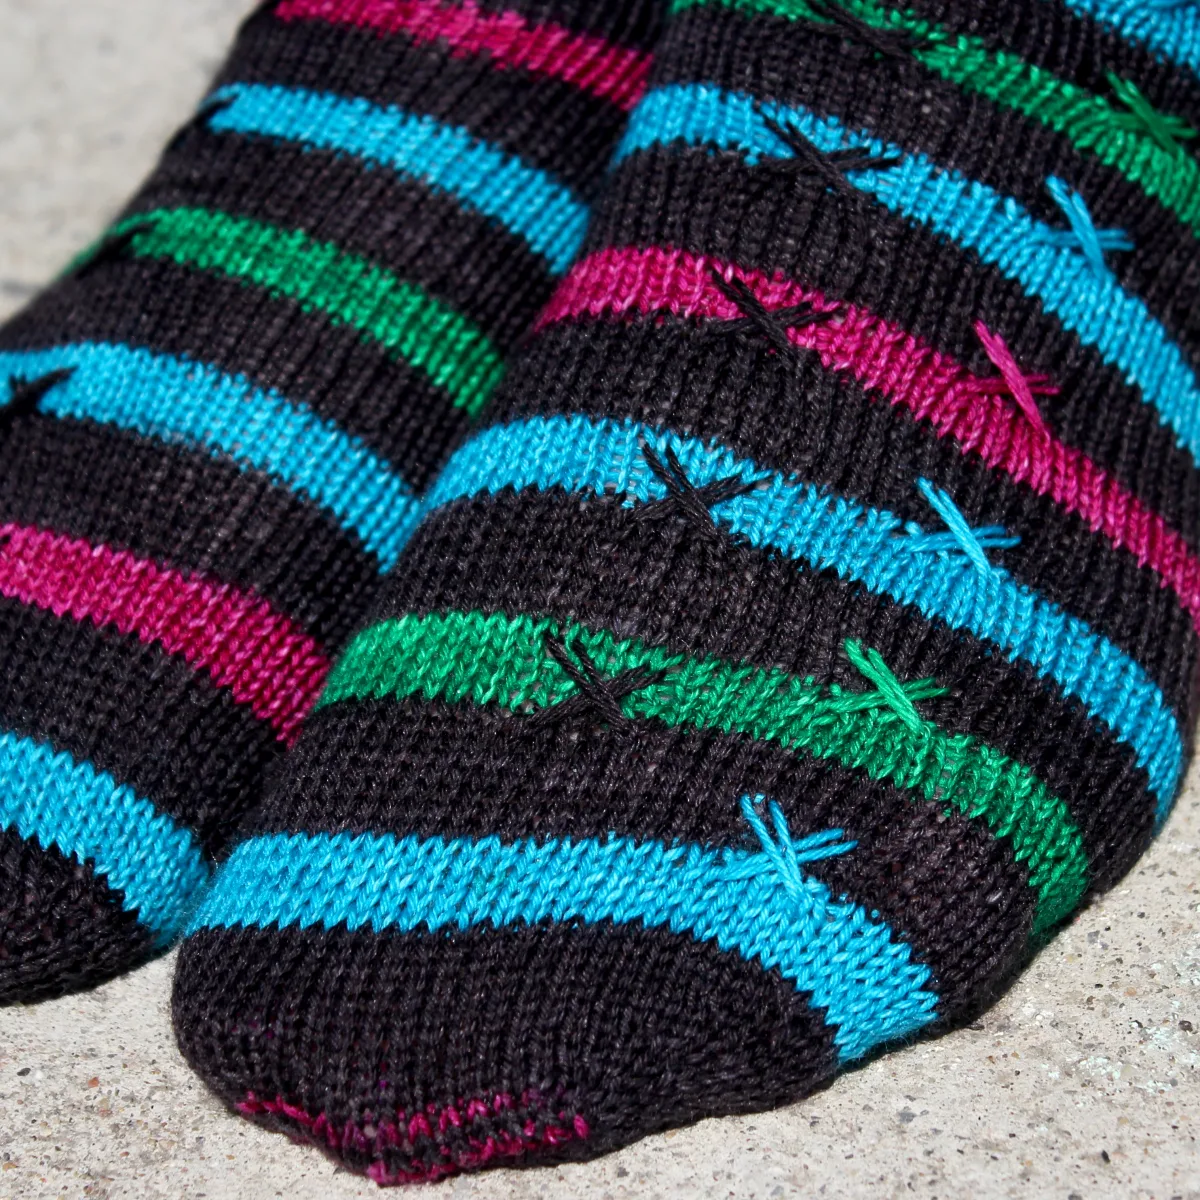 Close up of striped knitted socks with X stitch details on top of the stripes.